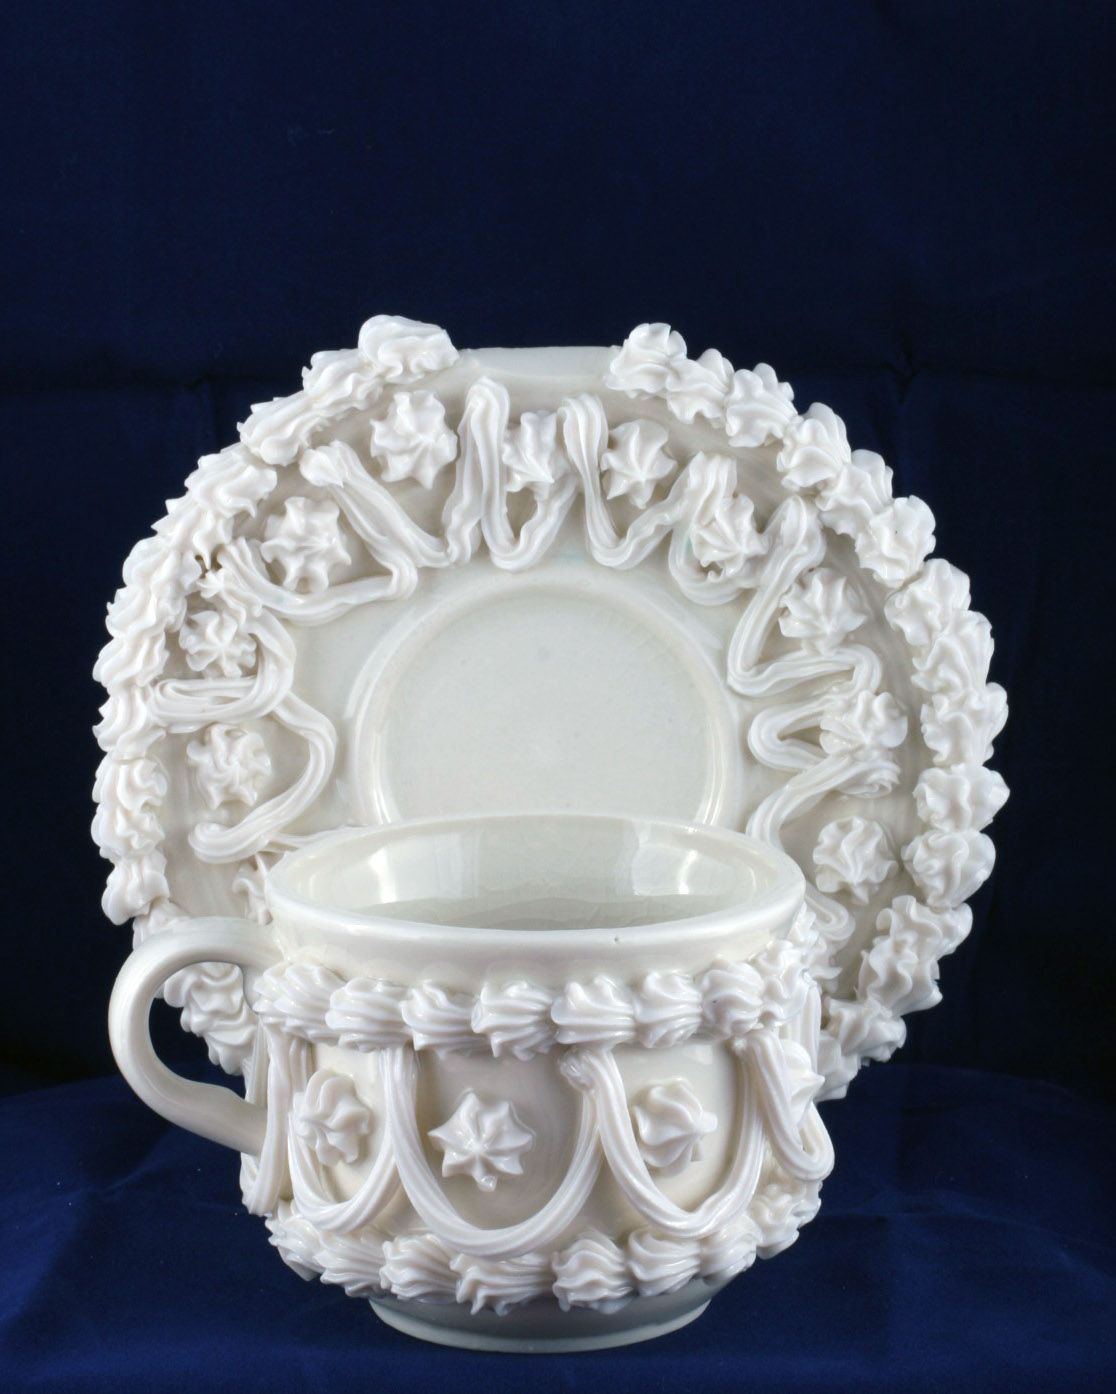 Robert Chamberlin, "White Cup and Saucer Set" SOLD